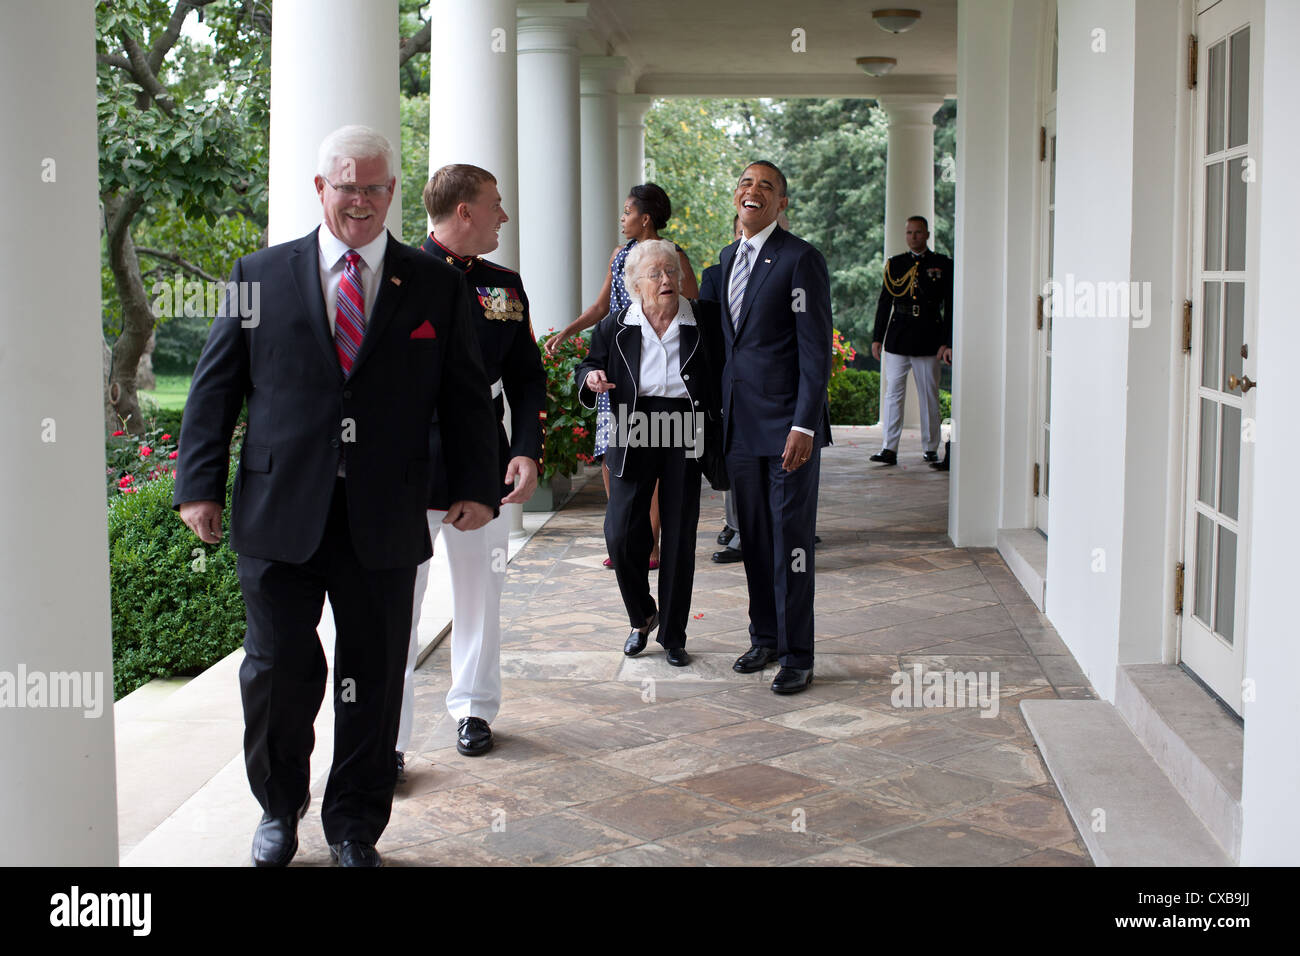 US President Barack Obama shares a laugh with Jean Meyer, the grandmother of Medal of Honor recipient Dakota Meyer, second from left September 15, 2011 as they and members of the Meyer family walk along the Colonnade of the White House. Stock Photo